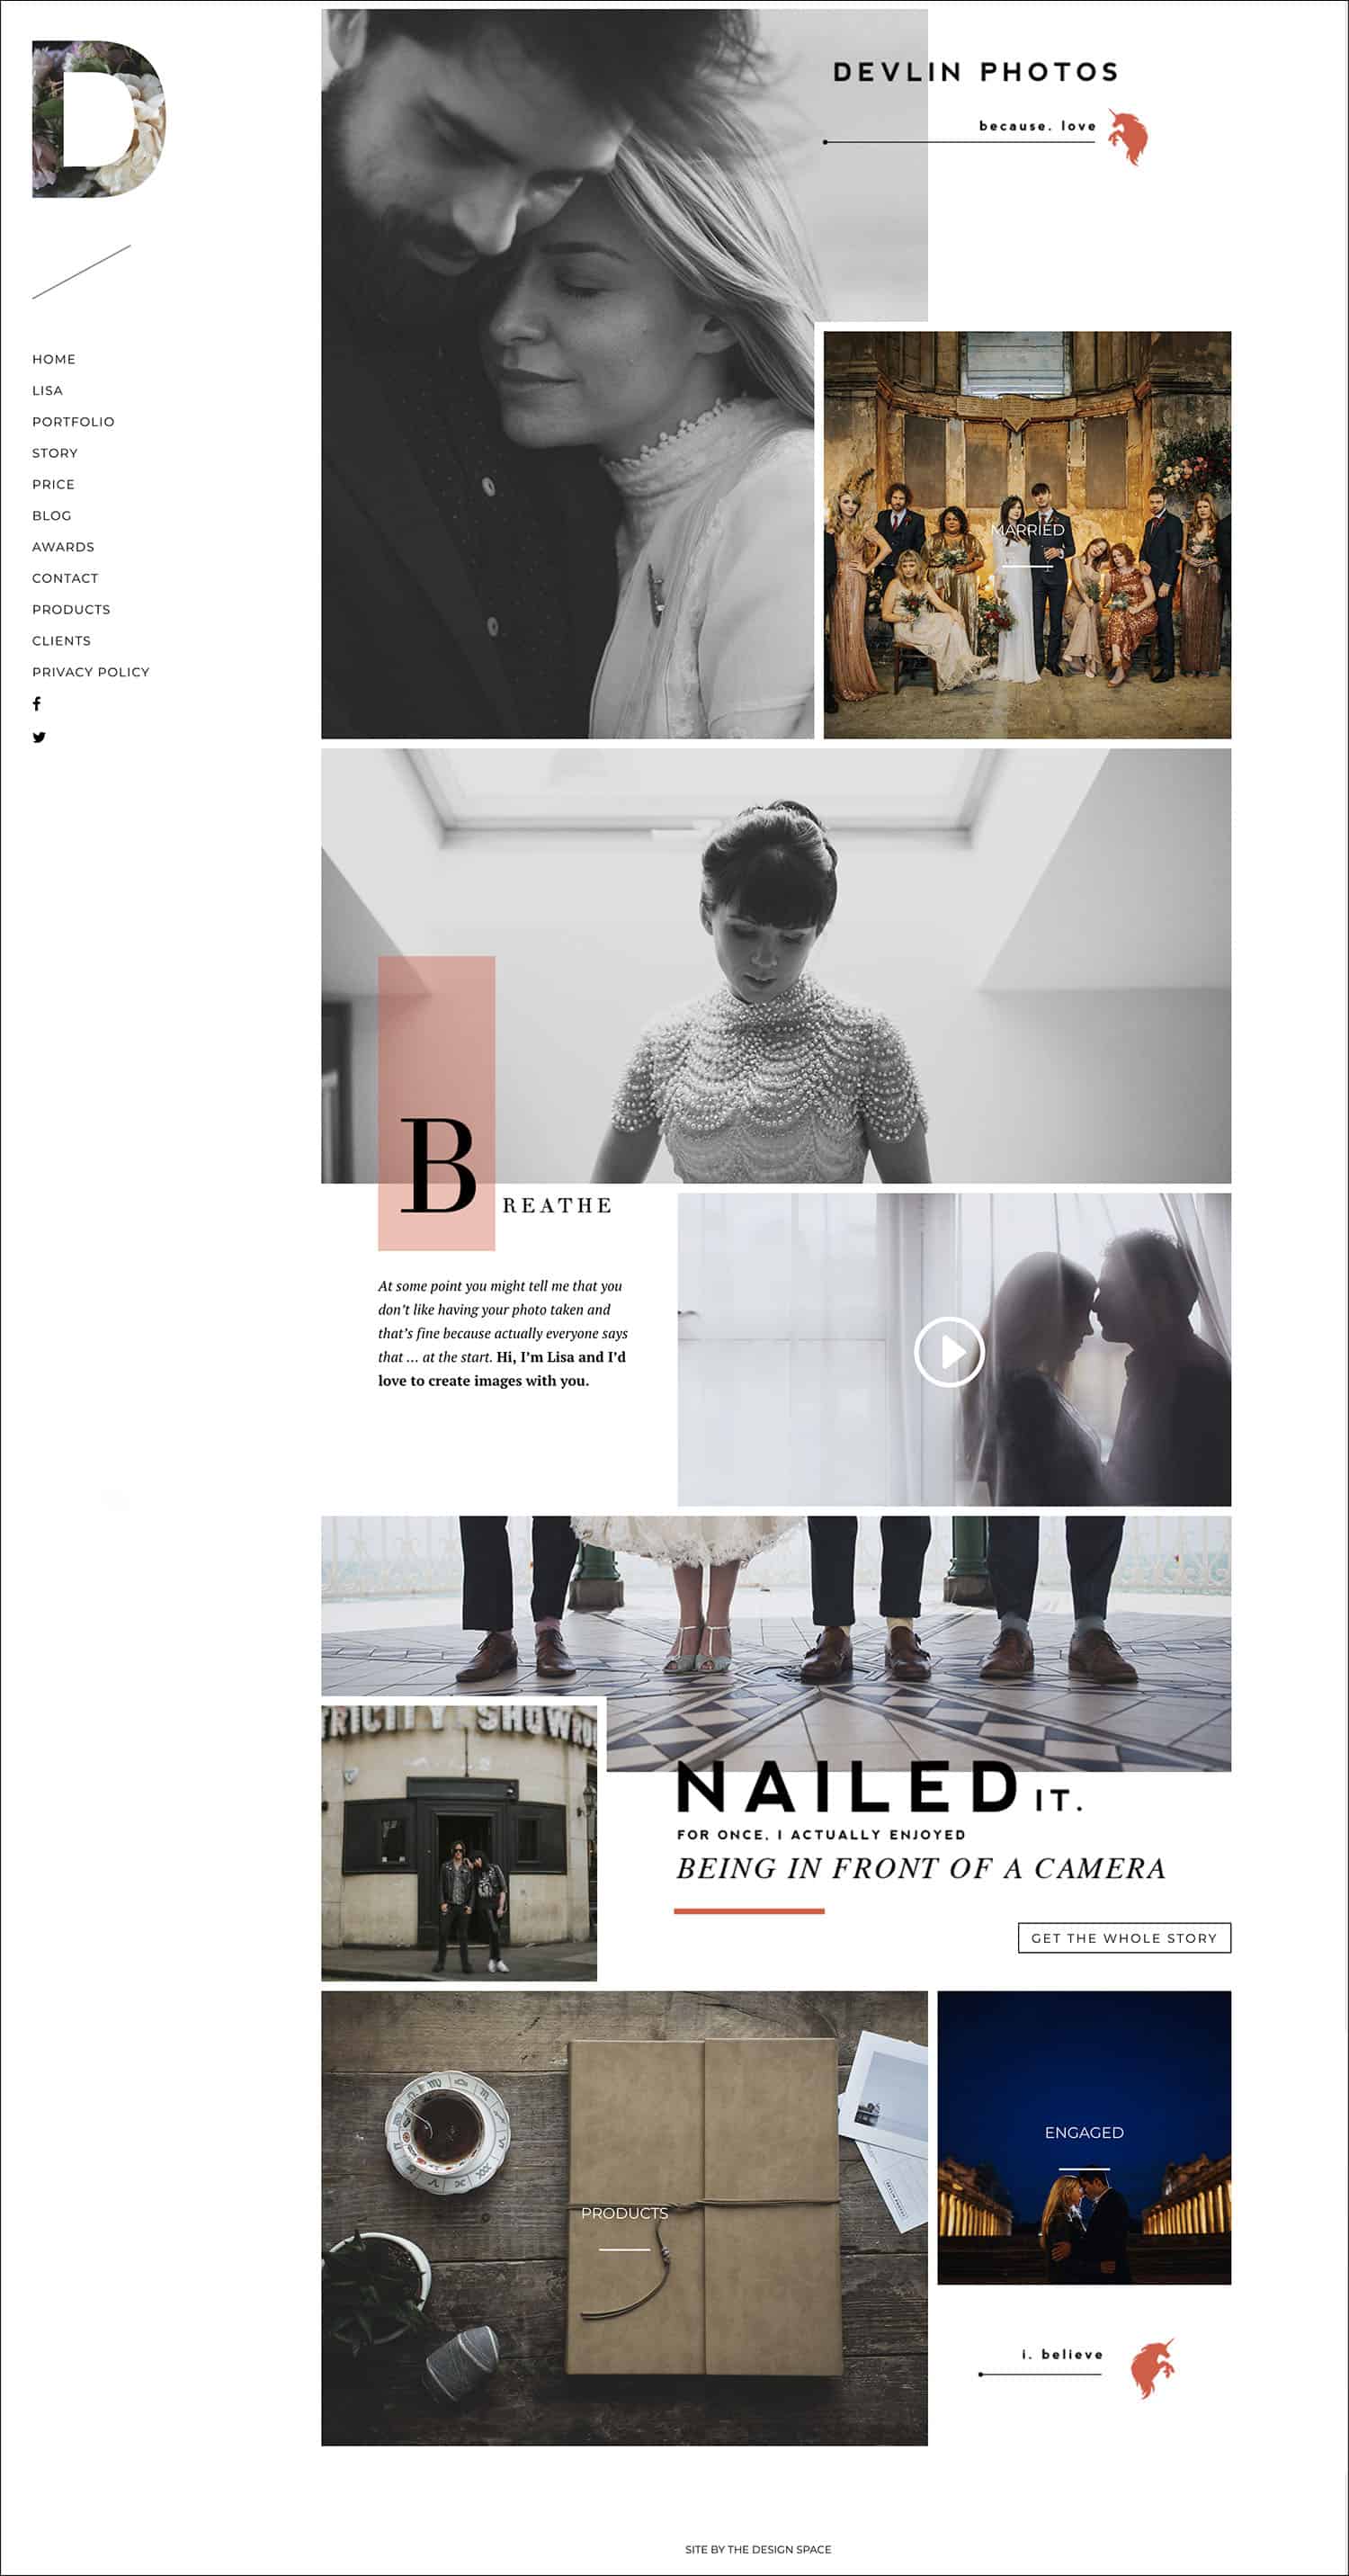 How To Make A Photography Website Your Dream Clients Can’t Resist: Lisa Devlin's homepage is playful and fun without being unprofessional or cluttered.